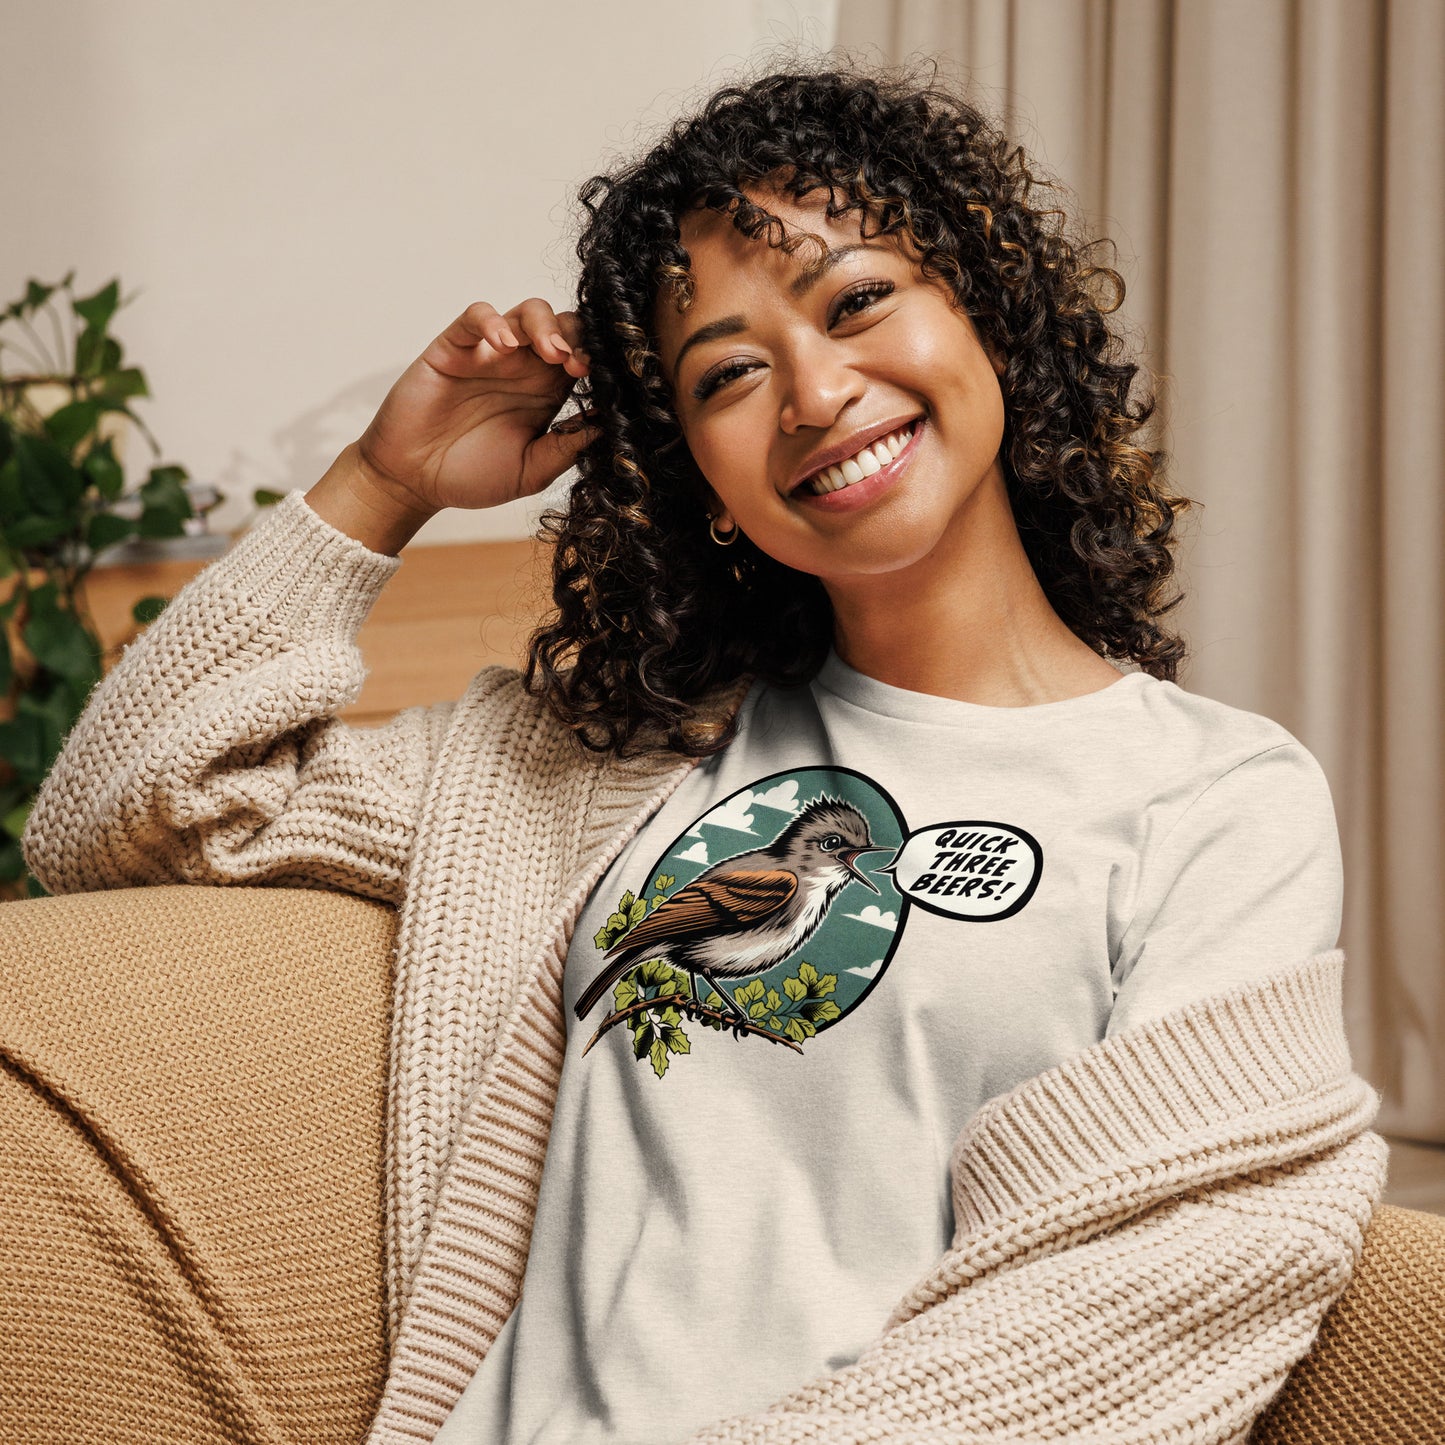 Olive-Sided Flycatcher Women's Relaxed T-Shirt